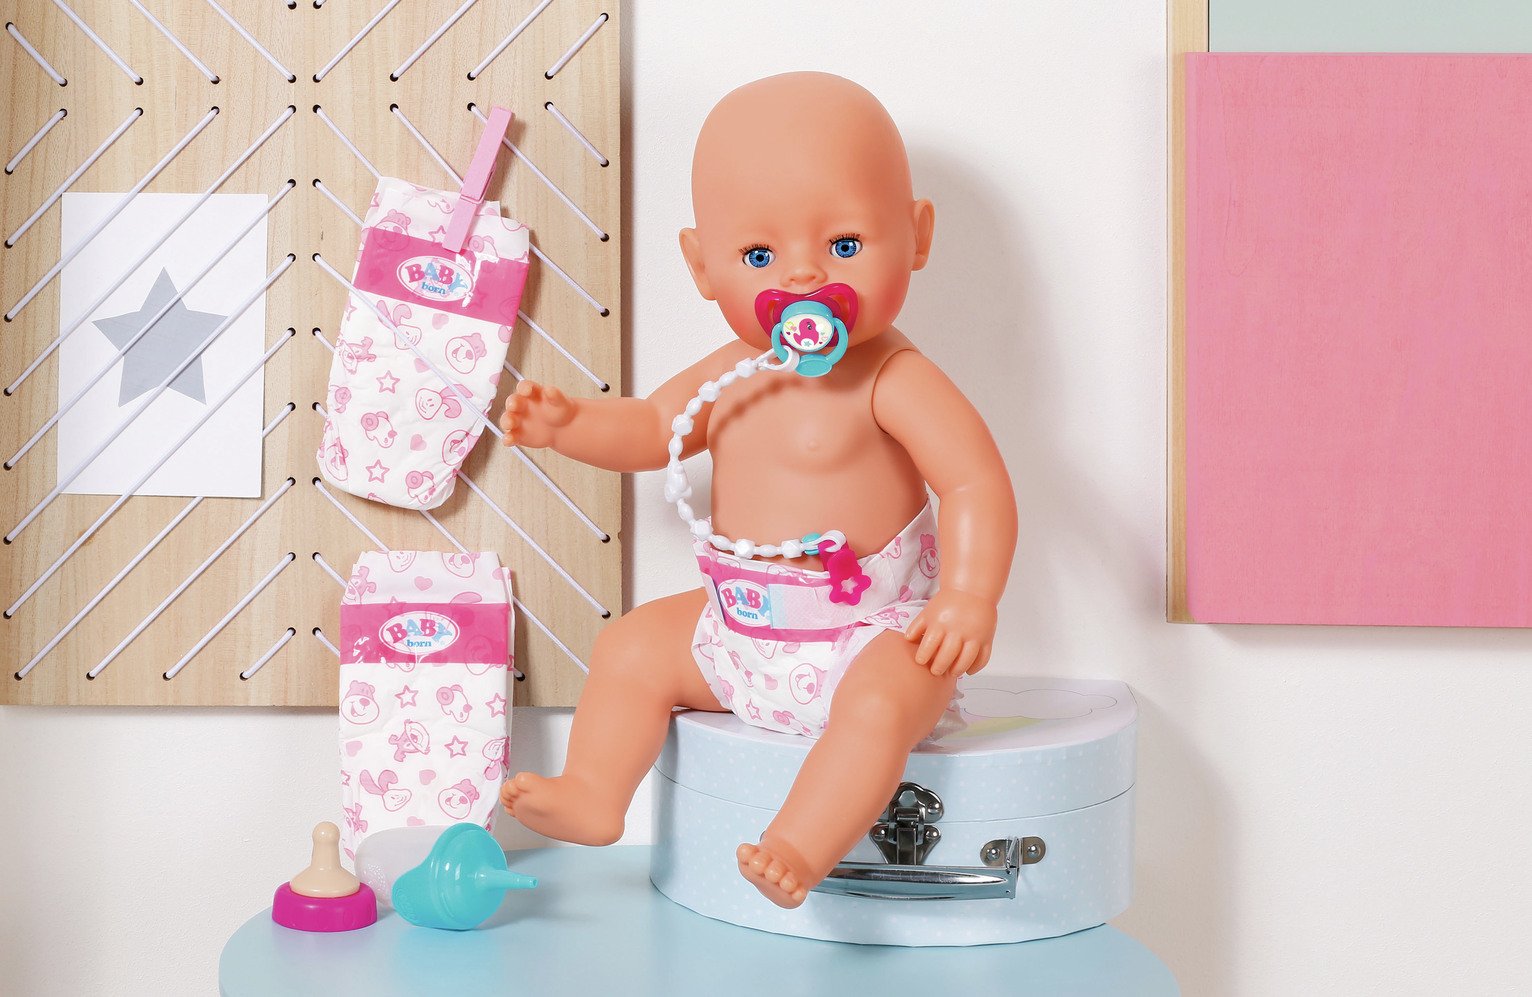 BABY born Doll Accessories Set Review